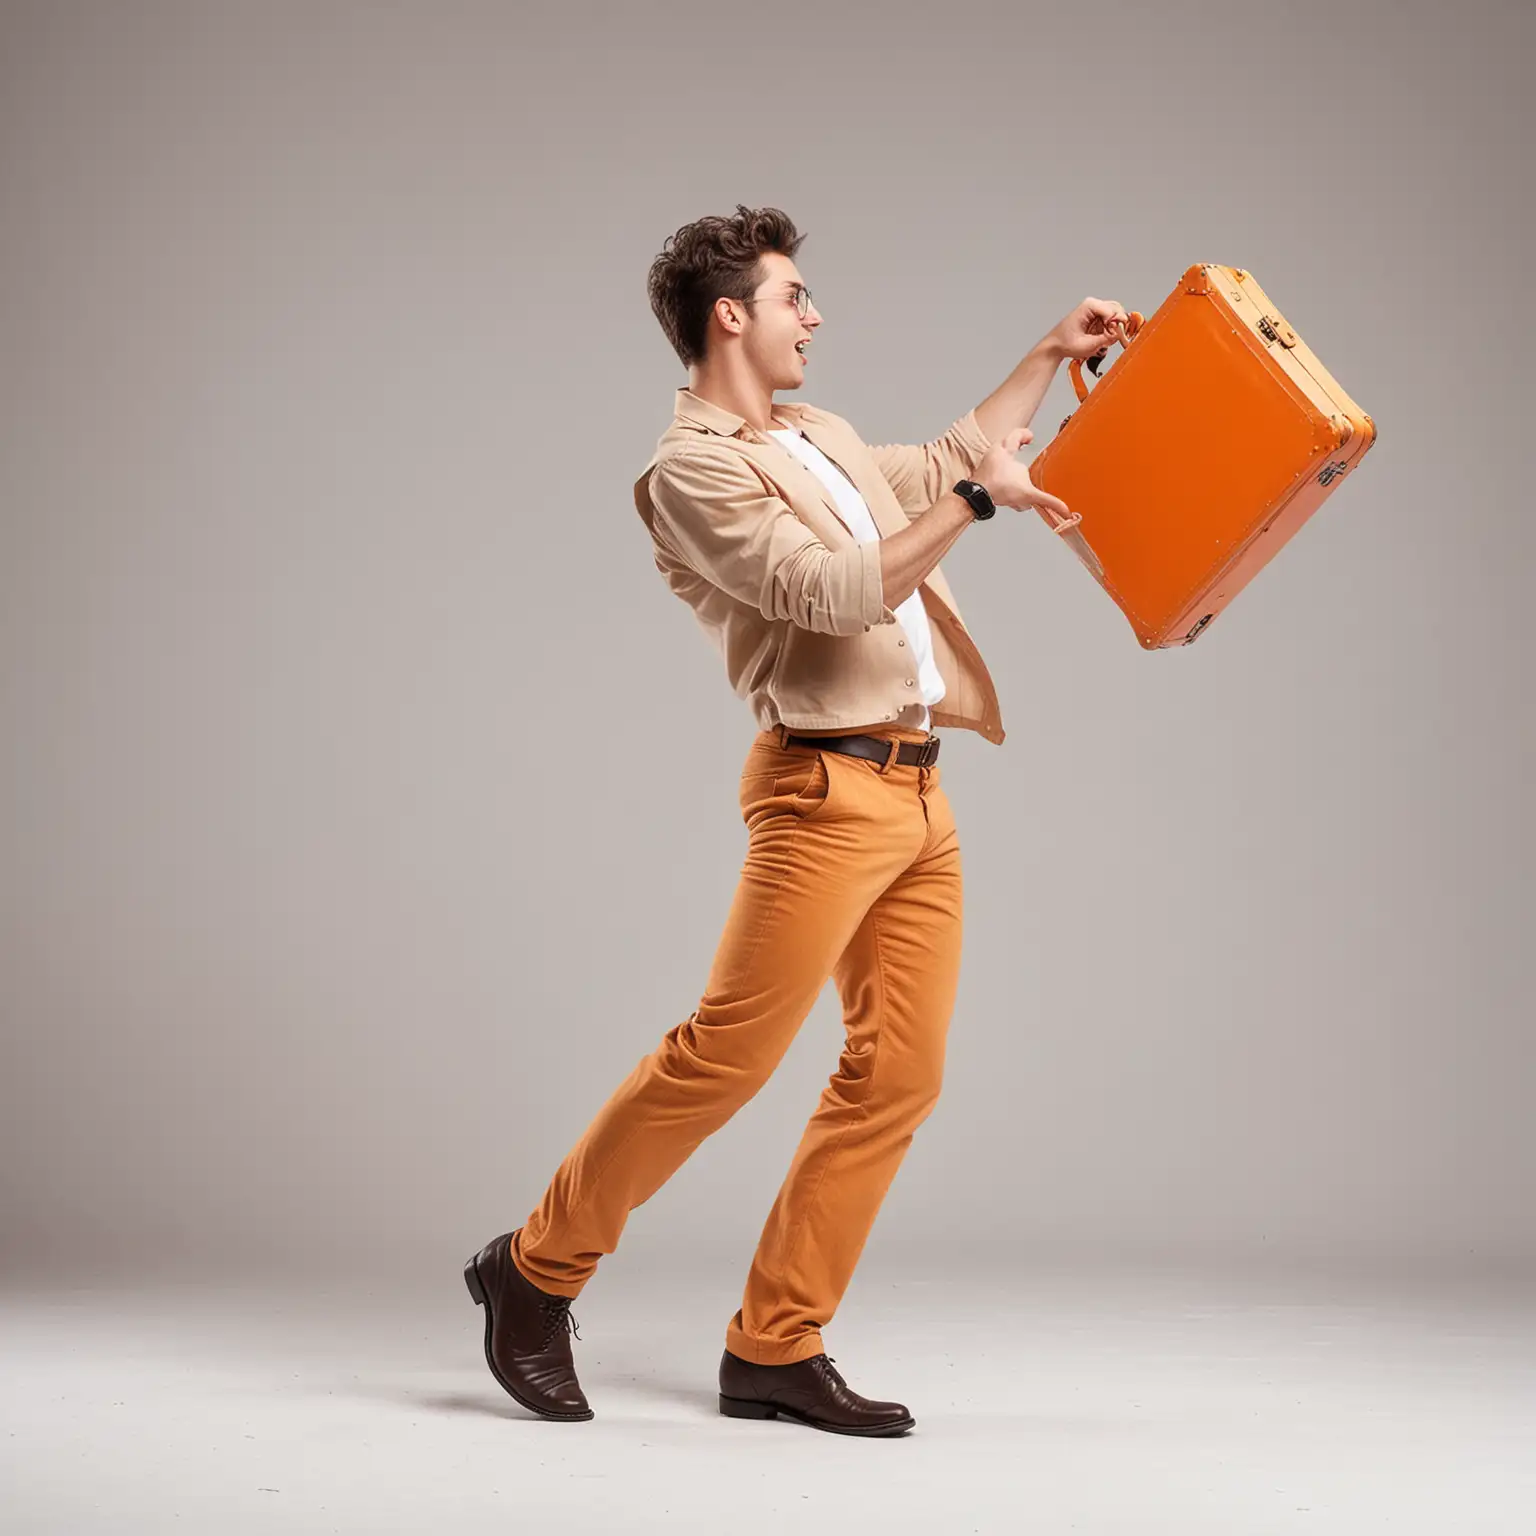 Young Man Dancing with Orange Briefcase on White Background